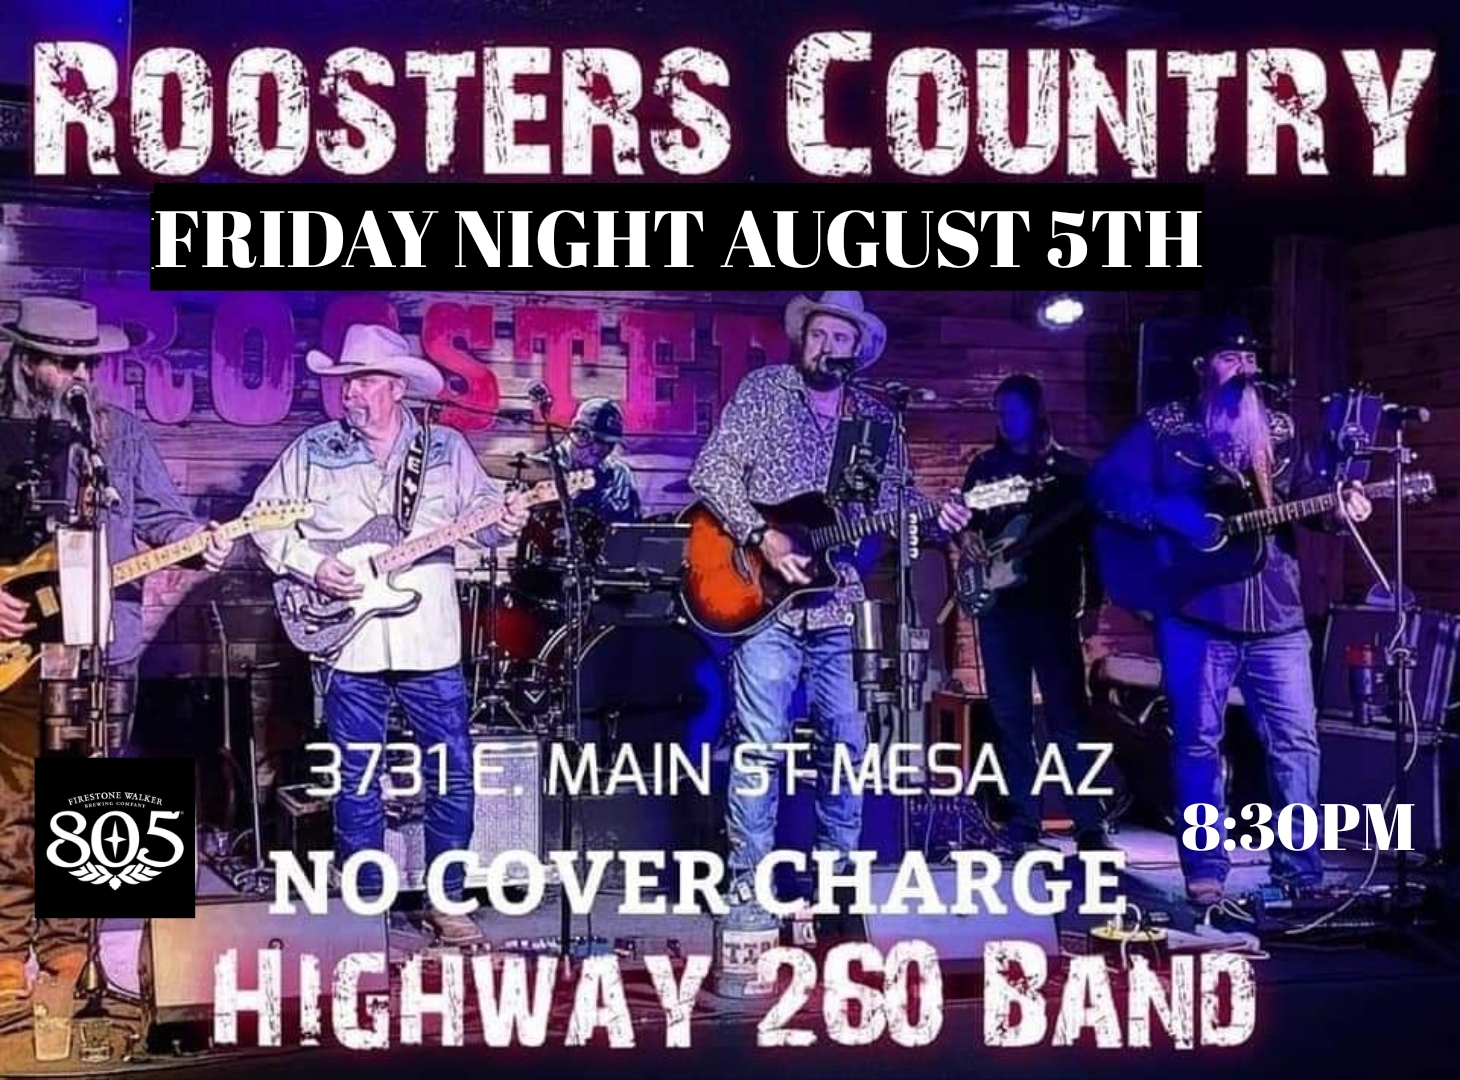 Highway 260 Band Live at Roosters Friday Night